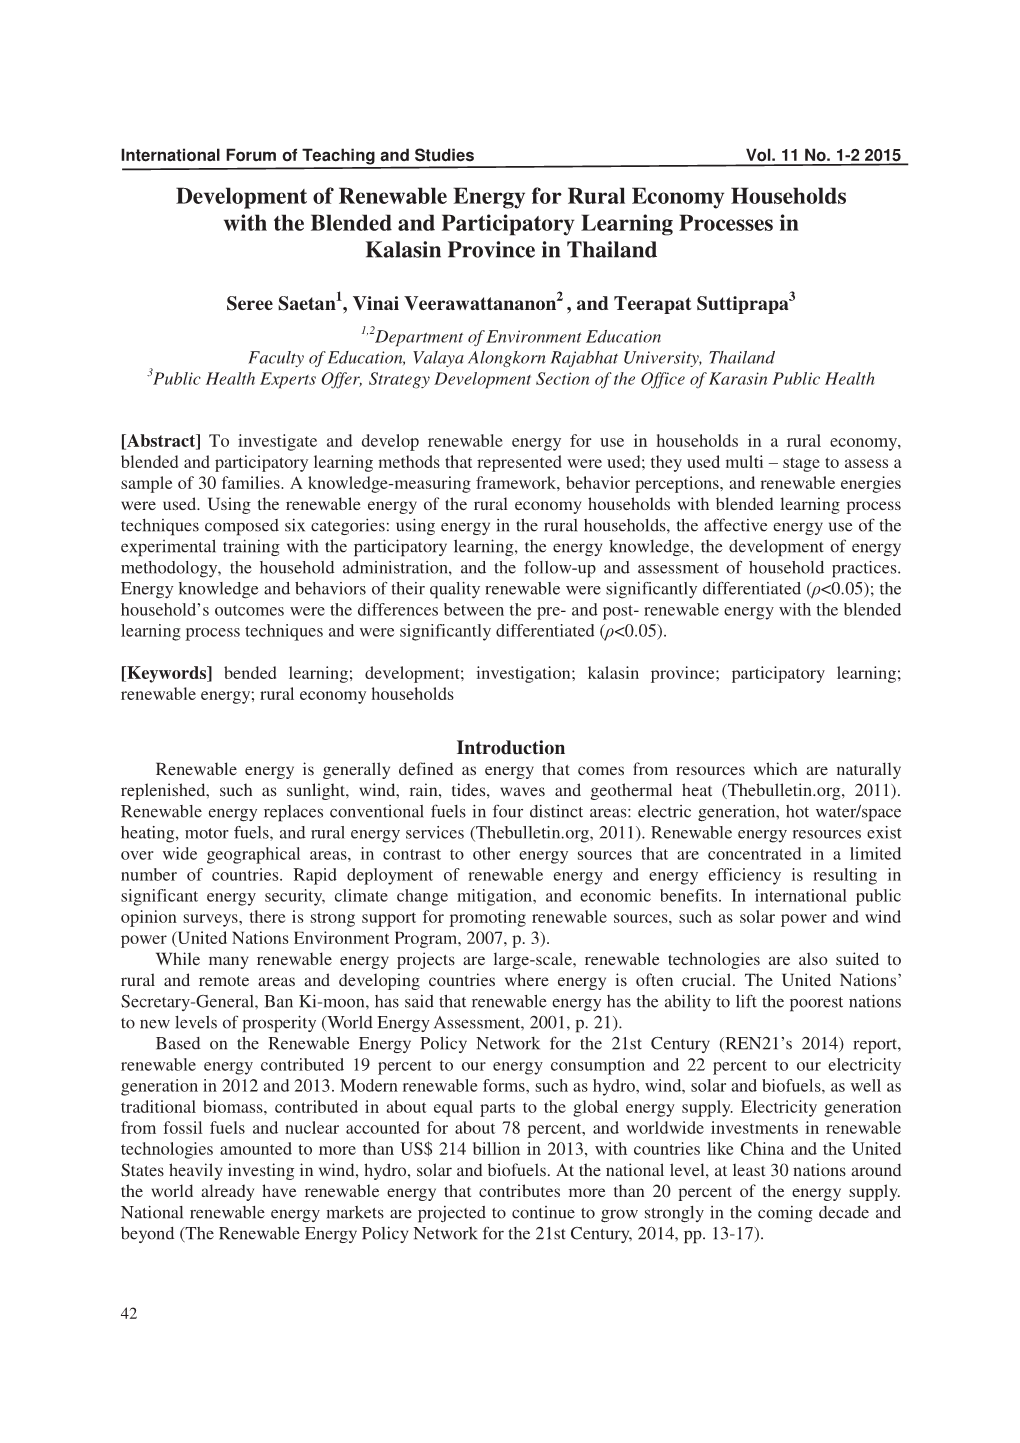 Development of Renewable Energy for Rural Economy Households with the Blended and Participatory Learning Processes in Kalasin Province in Thailand